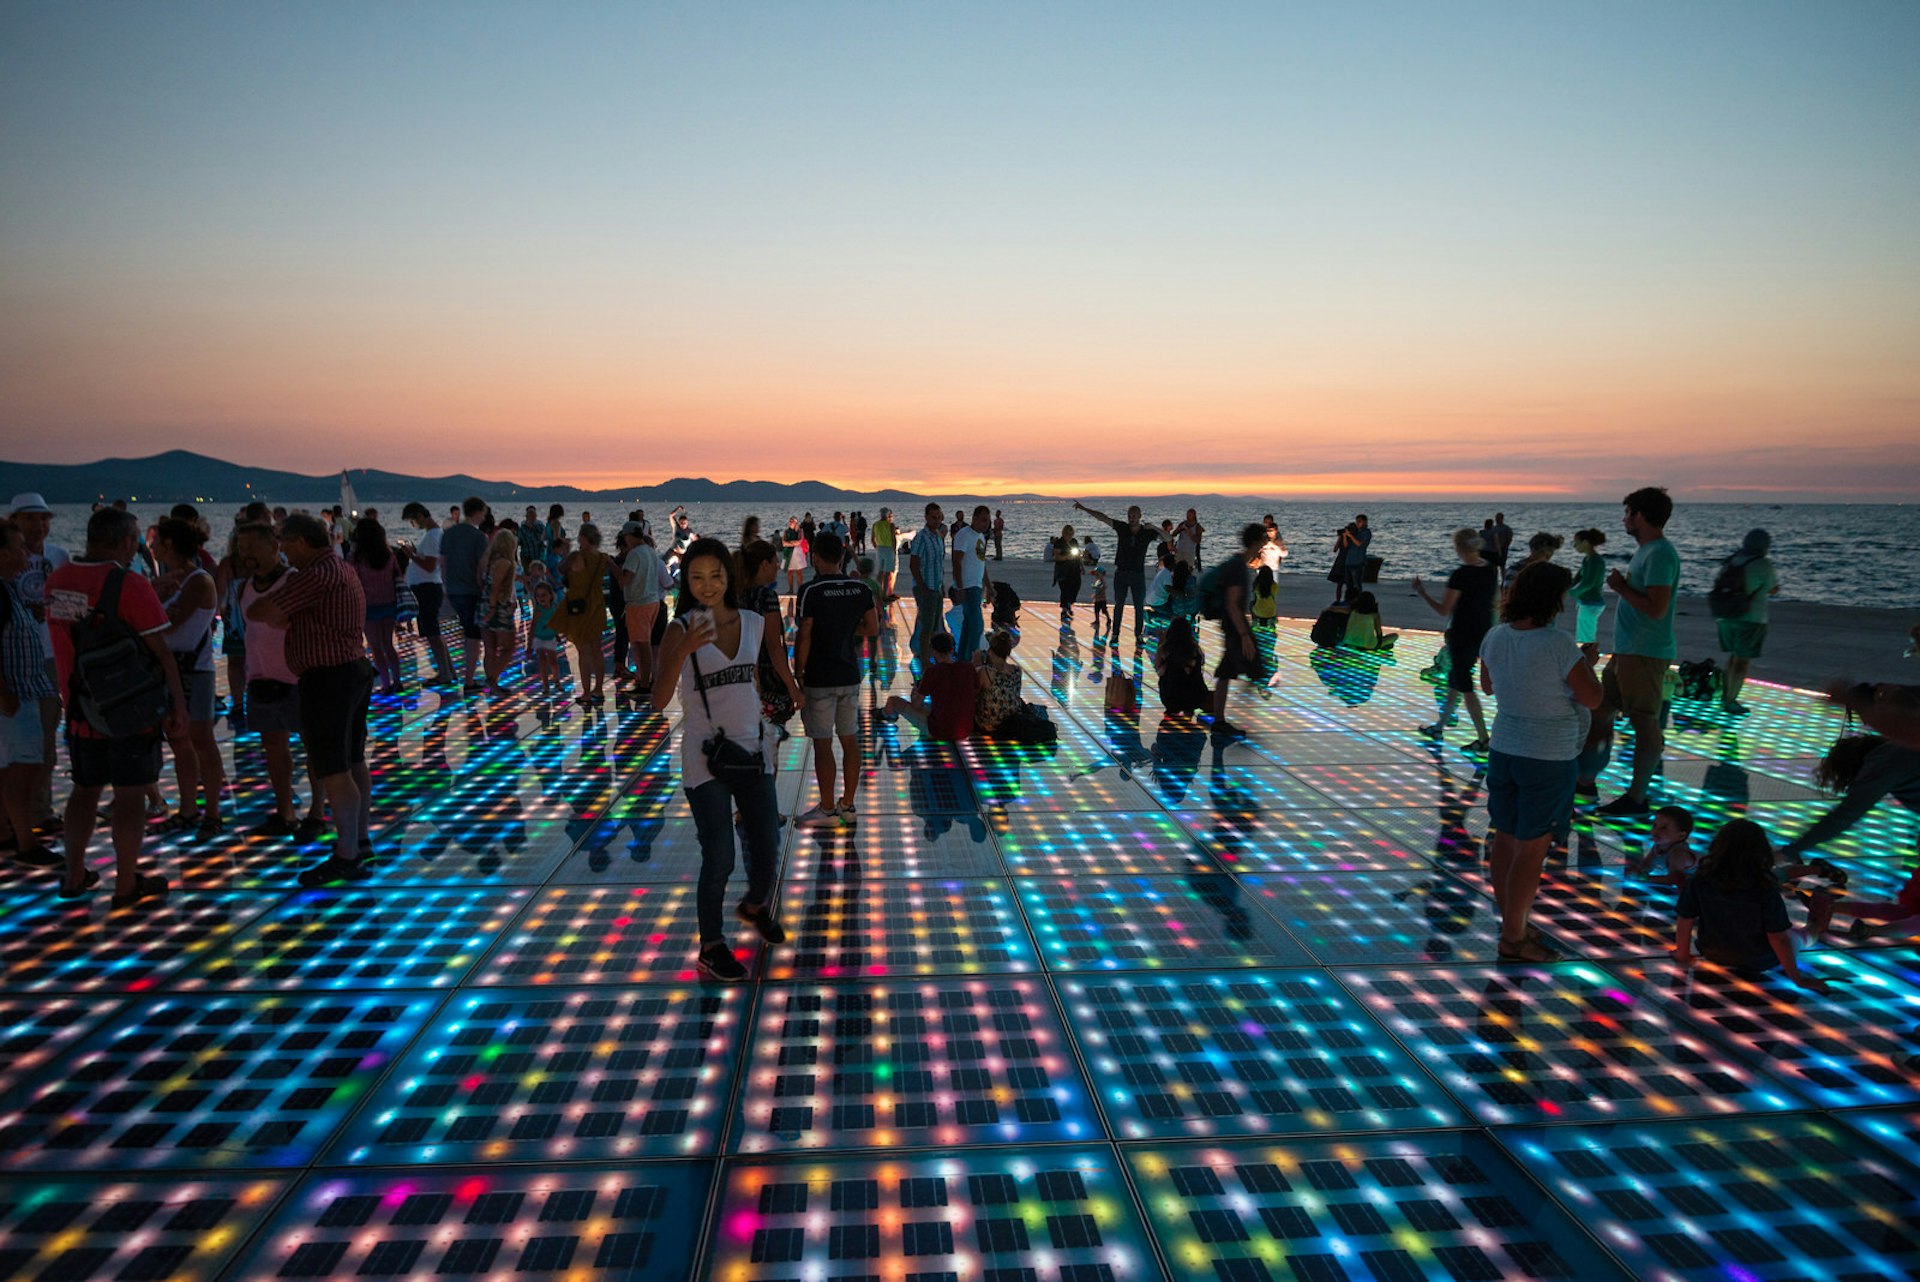 People stand on a platform with hundreds of multicoloured lights as the sun sets © Ventura / Shutterstock